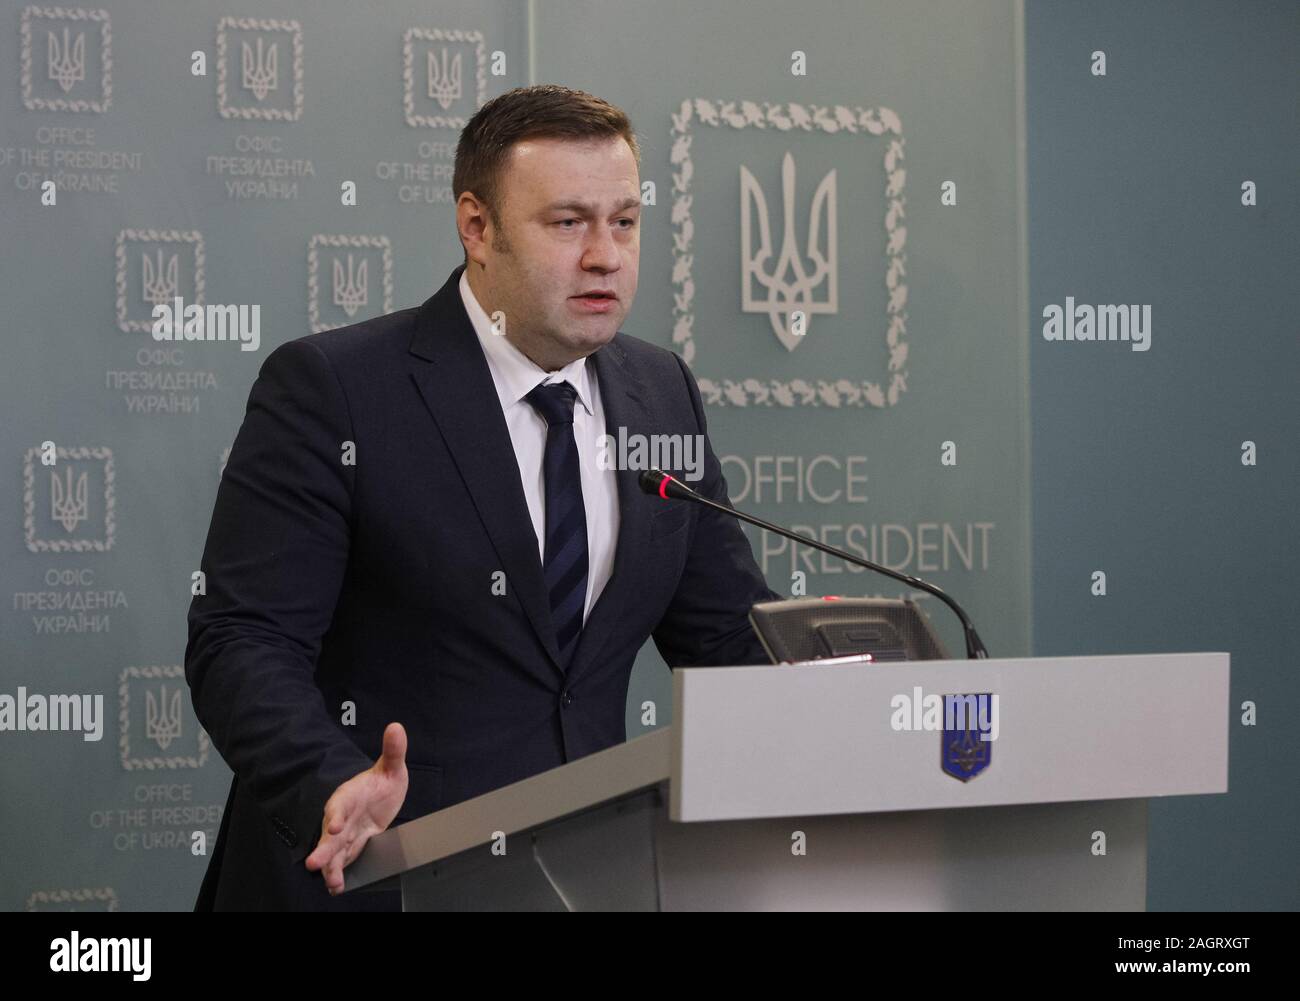 December 21, 2019, Kiev, Ukraine: Ukrainian Minister of energy and environmental erotection OLEKSIY ORZHEL speaks during a briefing with the Naftogaz of Ukraine Executive Director YURIY VITRENKO (not seen) in Kiev, Ukraine, on 21 December 2019. As media reported, the EU, Ukraine and Russia reached a final agreement about Russian gas transit via Ukraine to Europe. (Credit Image: © Serg Glovny/ZUMA Wire) Stock Photo